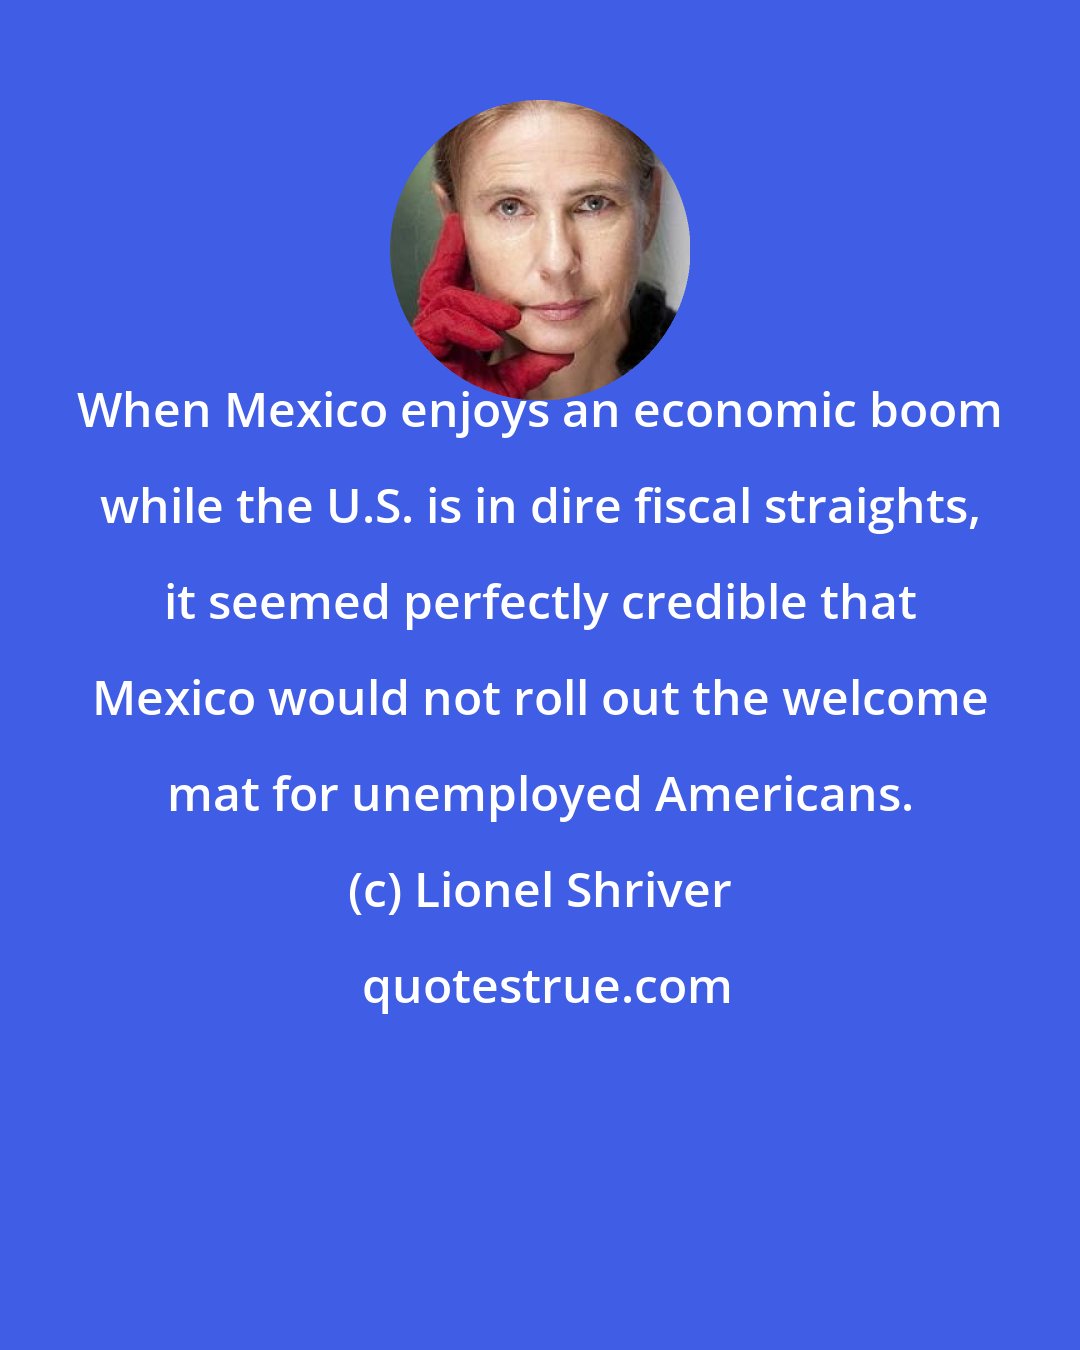 Lionel Shriver: When Mexico enjoys an economic boom while the U.S. is in dire fiscal straights, it seemed perfectly credible that Mexico would not roll out the welcome mat for unemployed Americans.